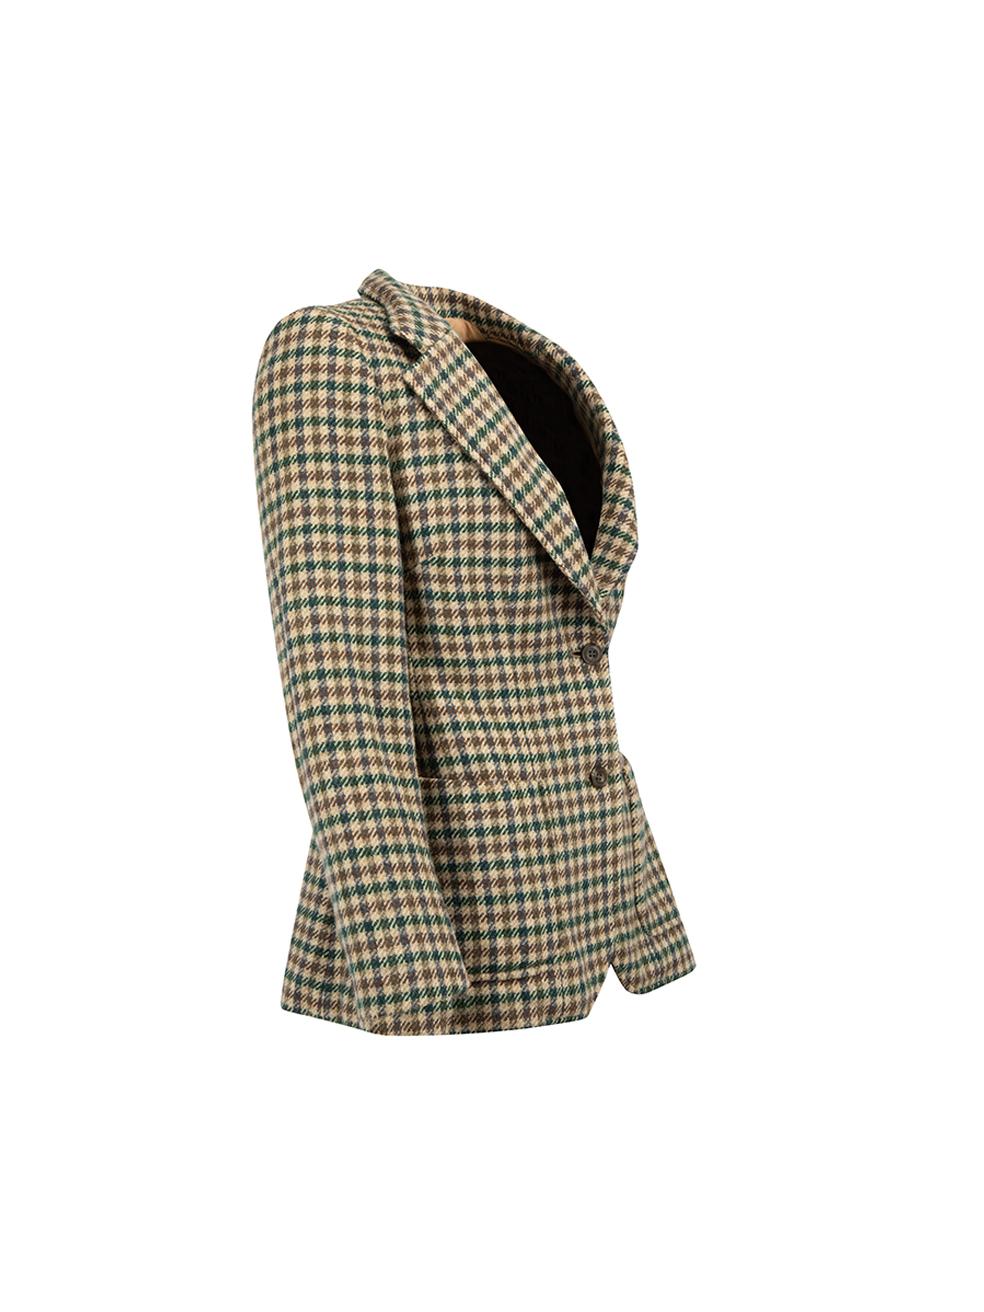 CONDITION is Good. Minimal wear to blazer is evident. Minimal wear to the tweed weave on the left-front side where the wool has a small pull, the seam of the right-sleeve lining has unravelled slightly, and the lining at the back vent seam join has